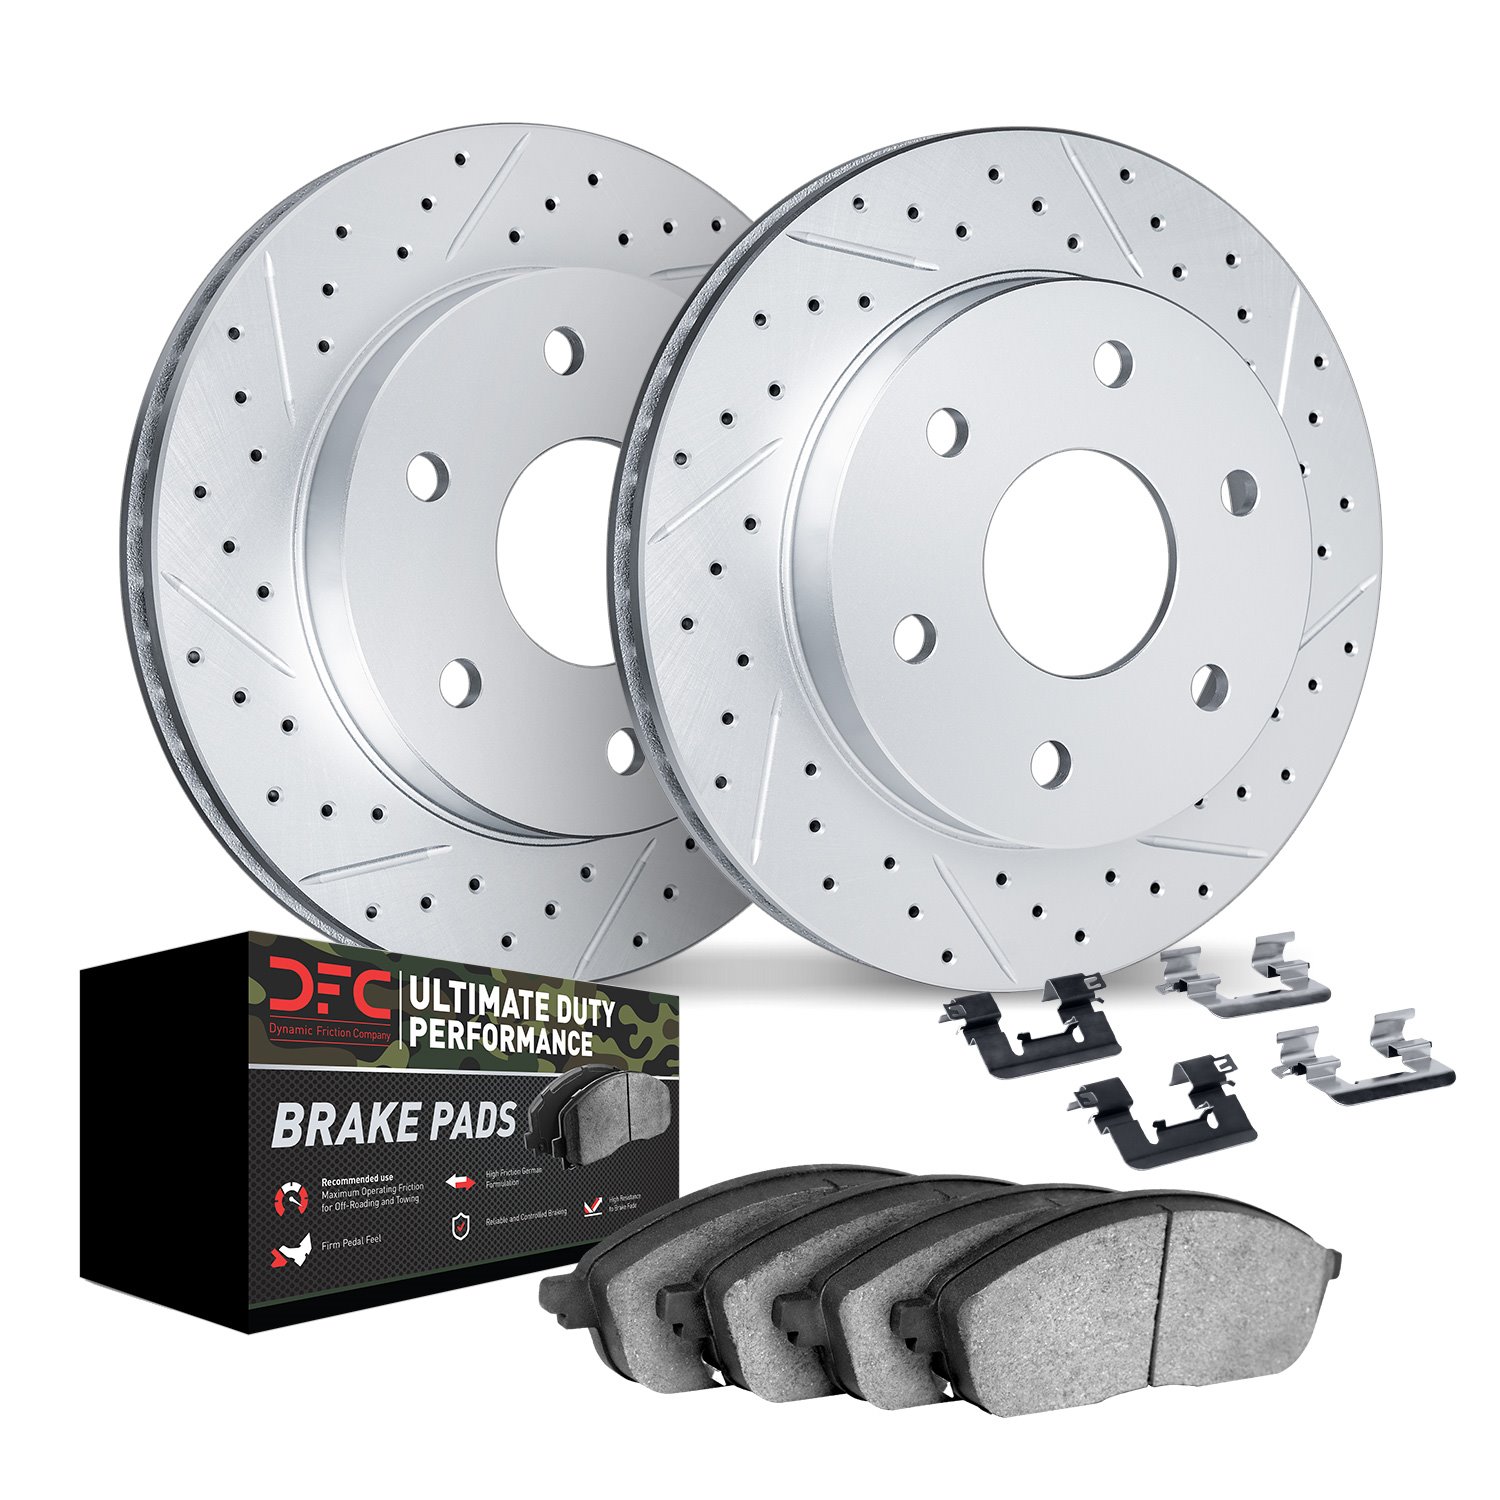 2412-54080 Geoperformance Drilled/Slotted Brake Rotors with Ultimate-Duty Brake Pads Kit & Hardware, 2018-2021 Ford/Lincoln/Merc